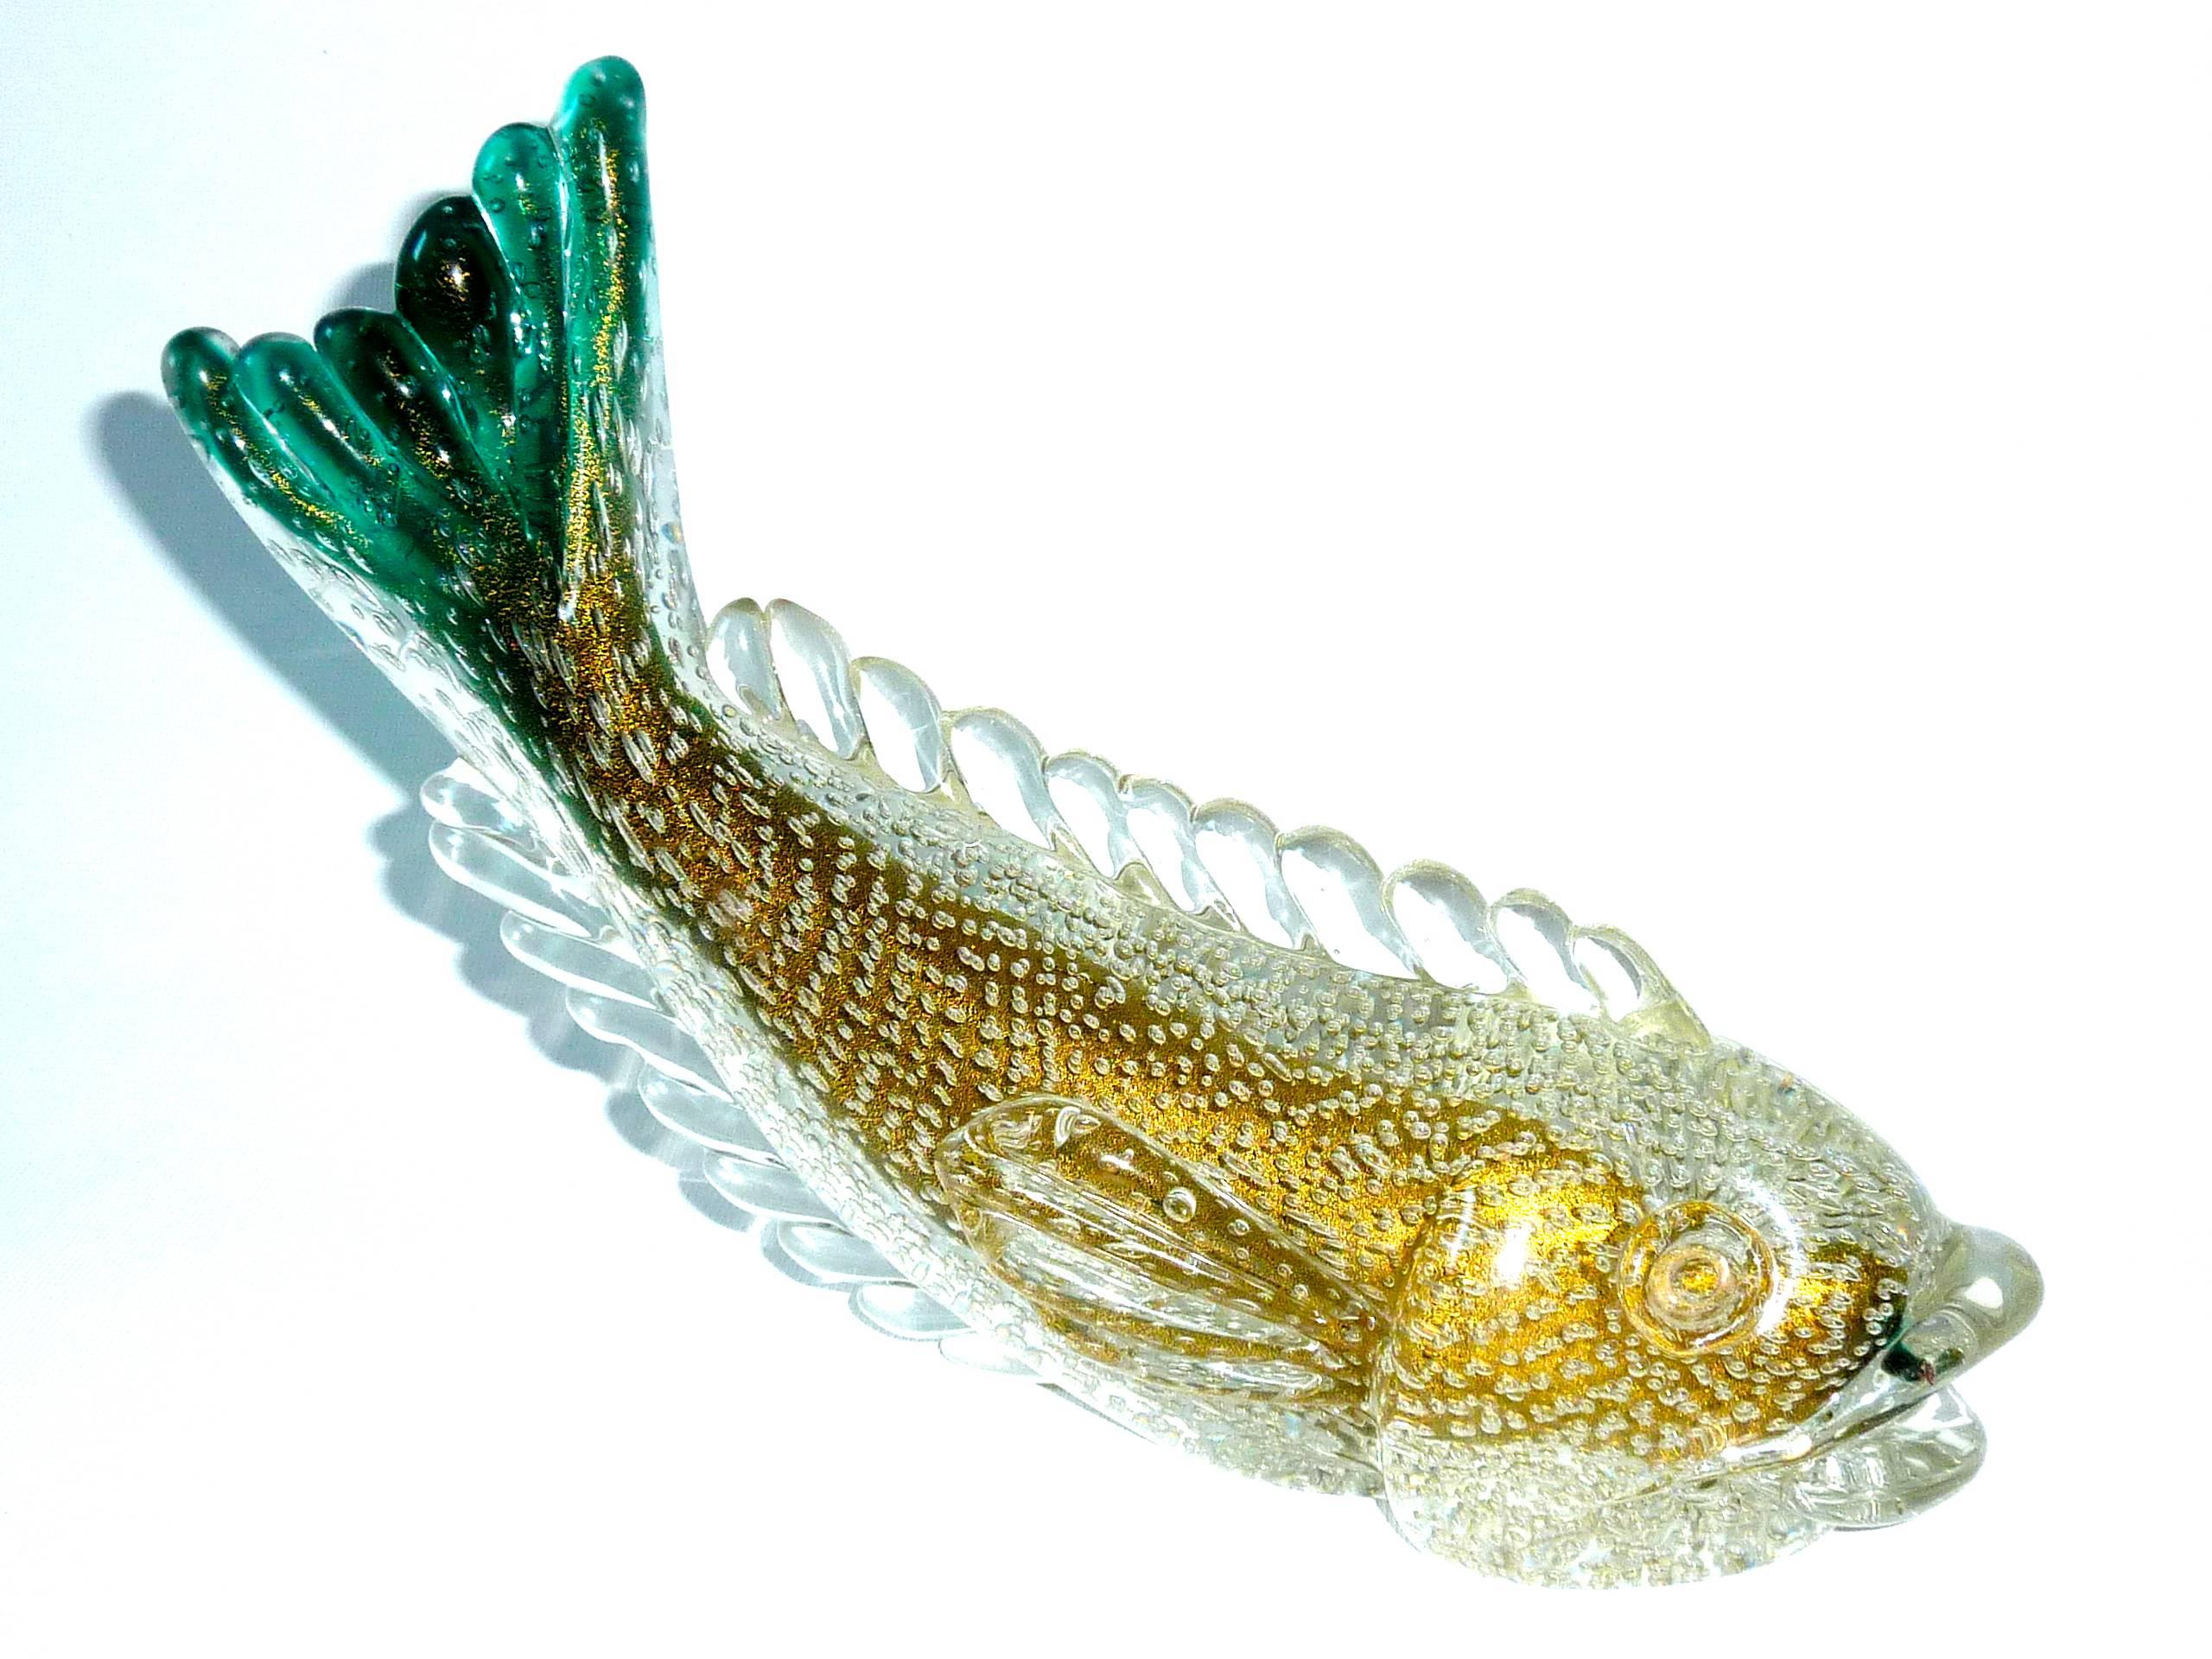 Rare Flavio Poli Bullicante fish sculpture 1937 for Archimede Seguso. It is made of heavy clear glass with bubbles and gold inclusions with a shaded green. It is documented in Art Glass by Archimede Seguso, Umberto Franzoi, page 68, for a variant